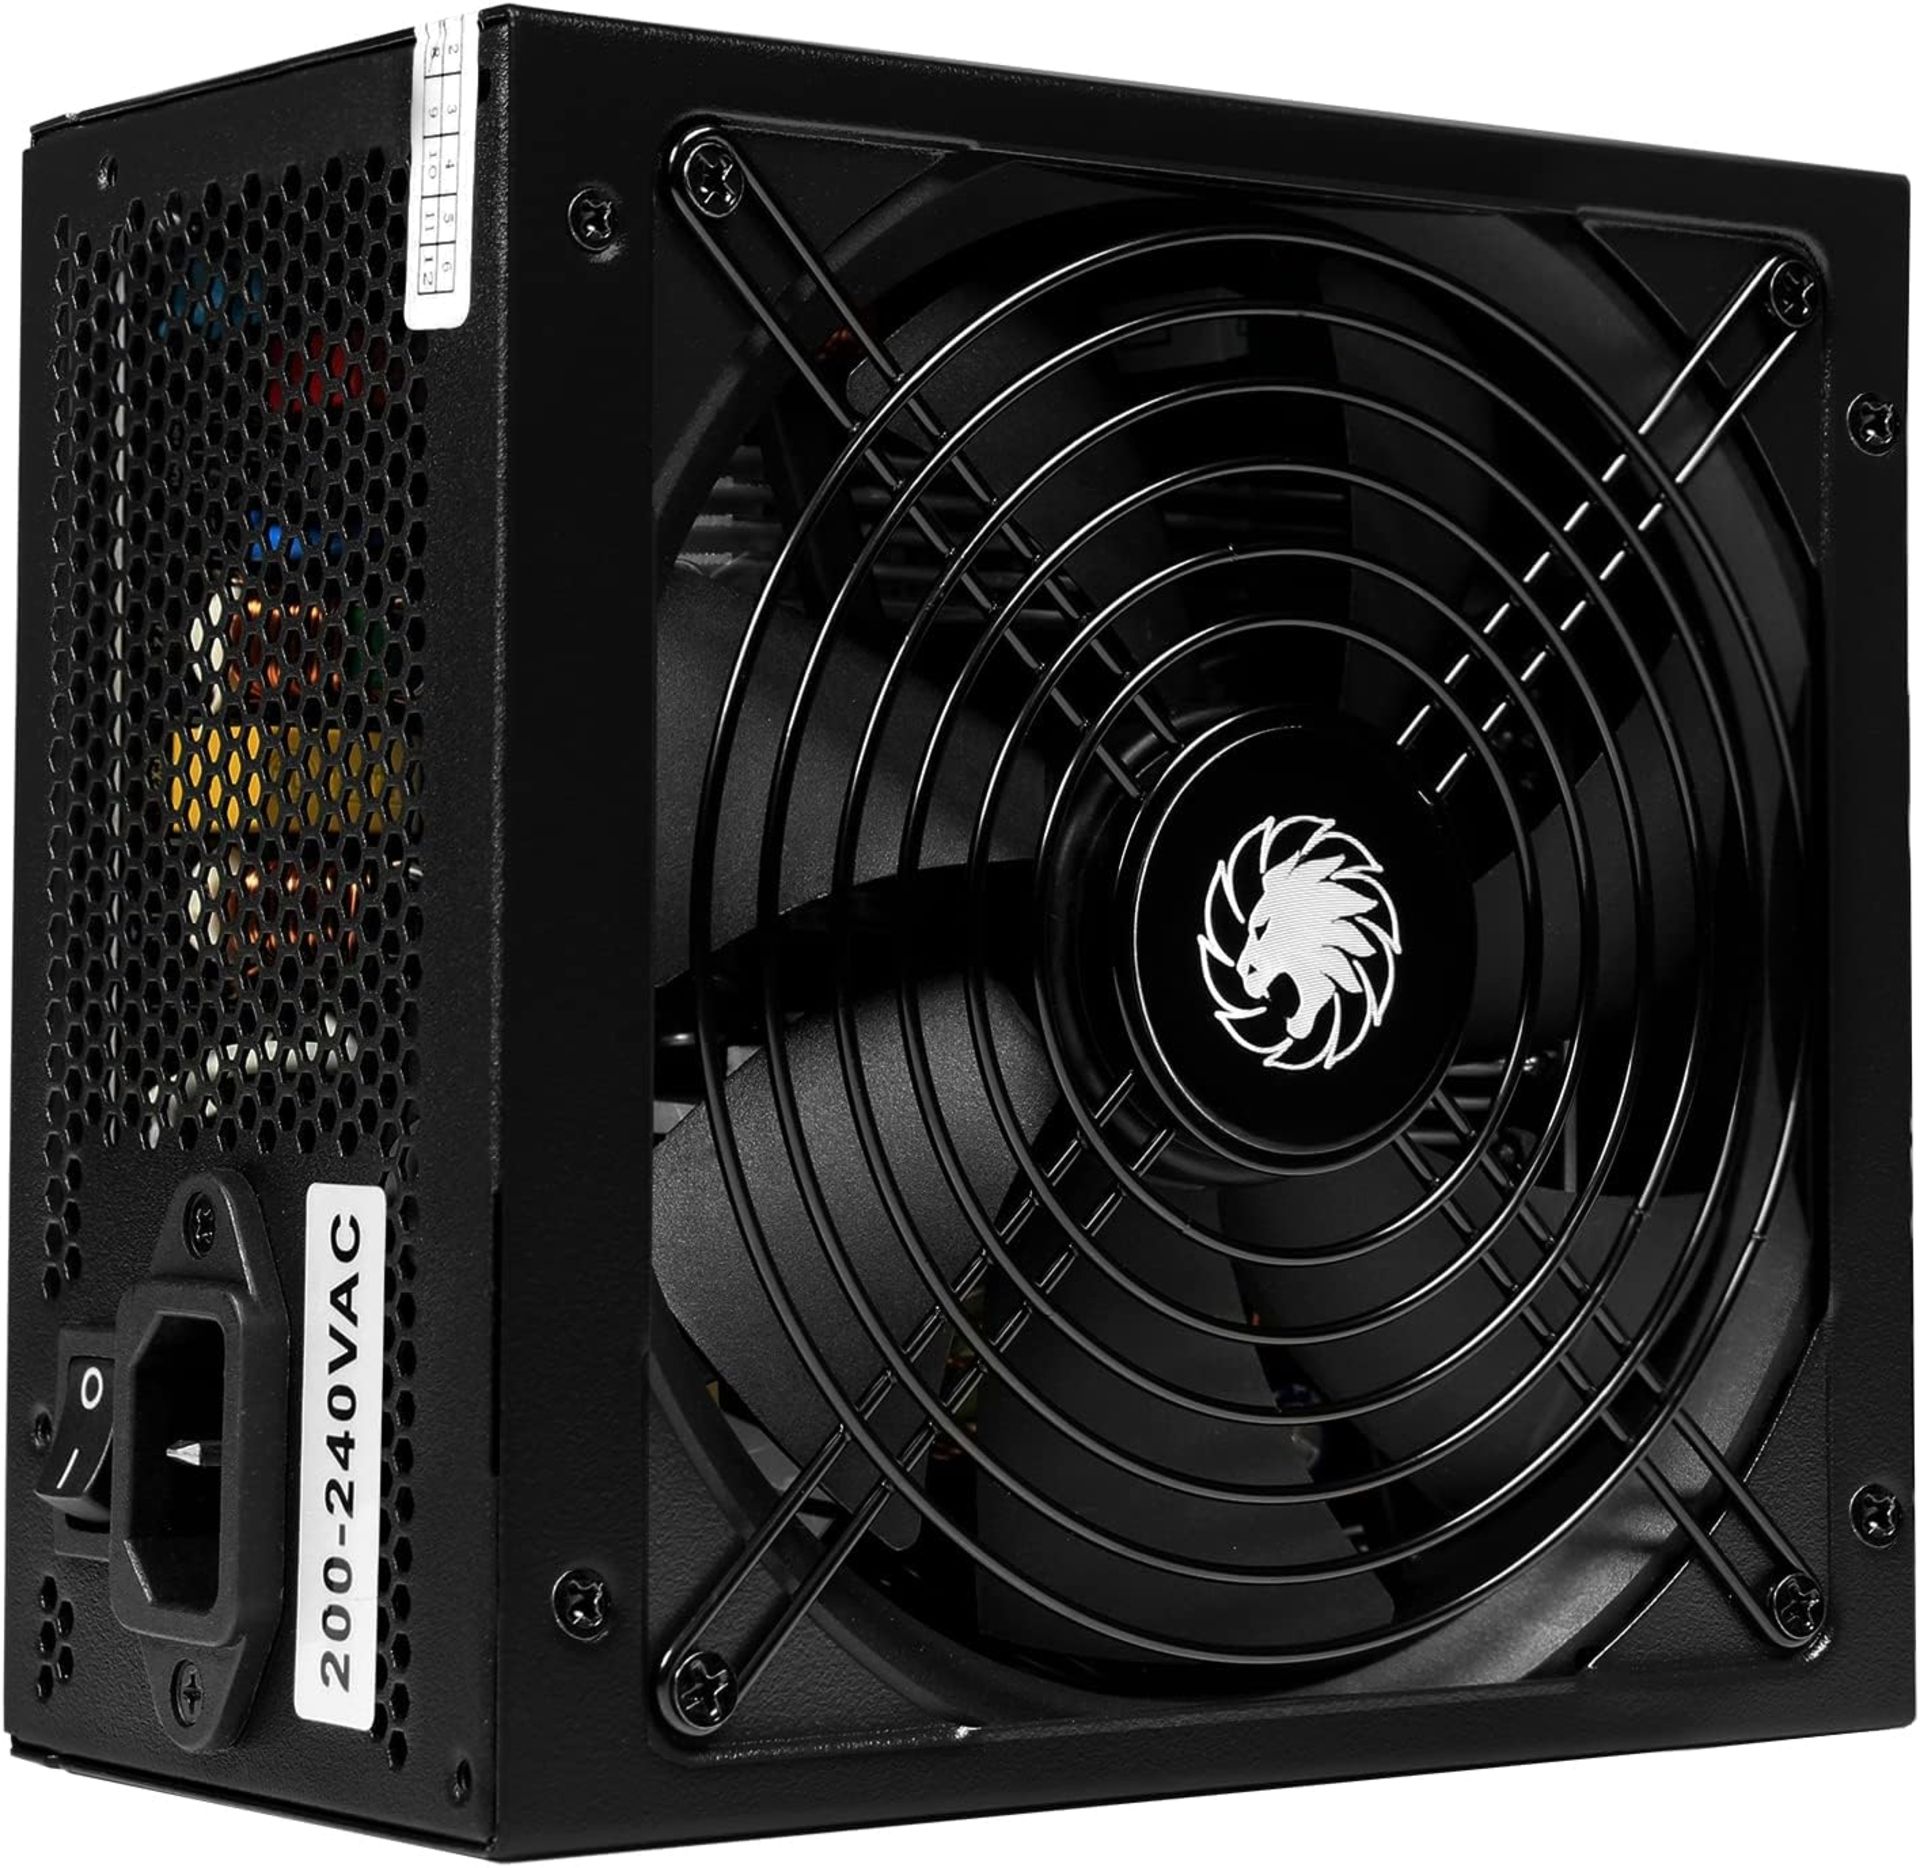 2x NEW & BOXED GAMEMAX Rampage 850w Power Supply. RRP £69.99 EACH. Semi-Modular - The 850W Rampage - Image 9 of 13